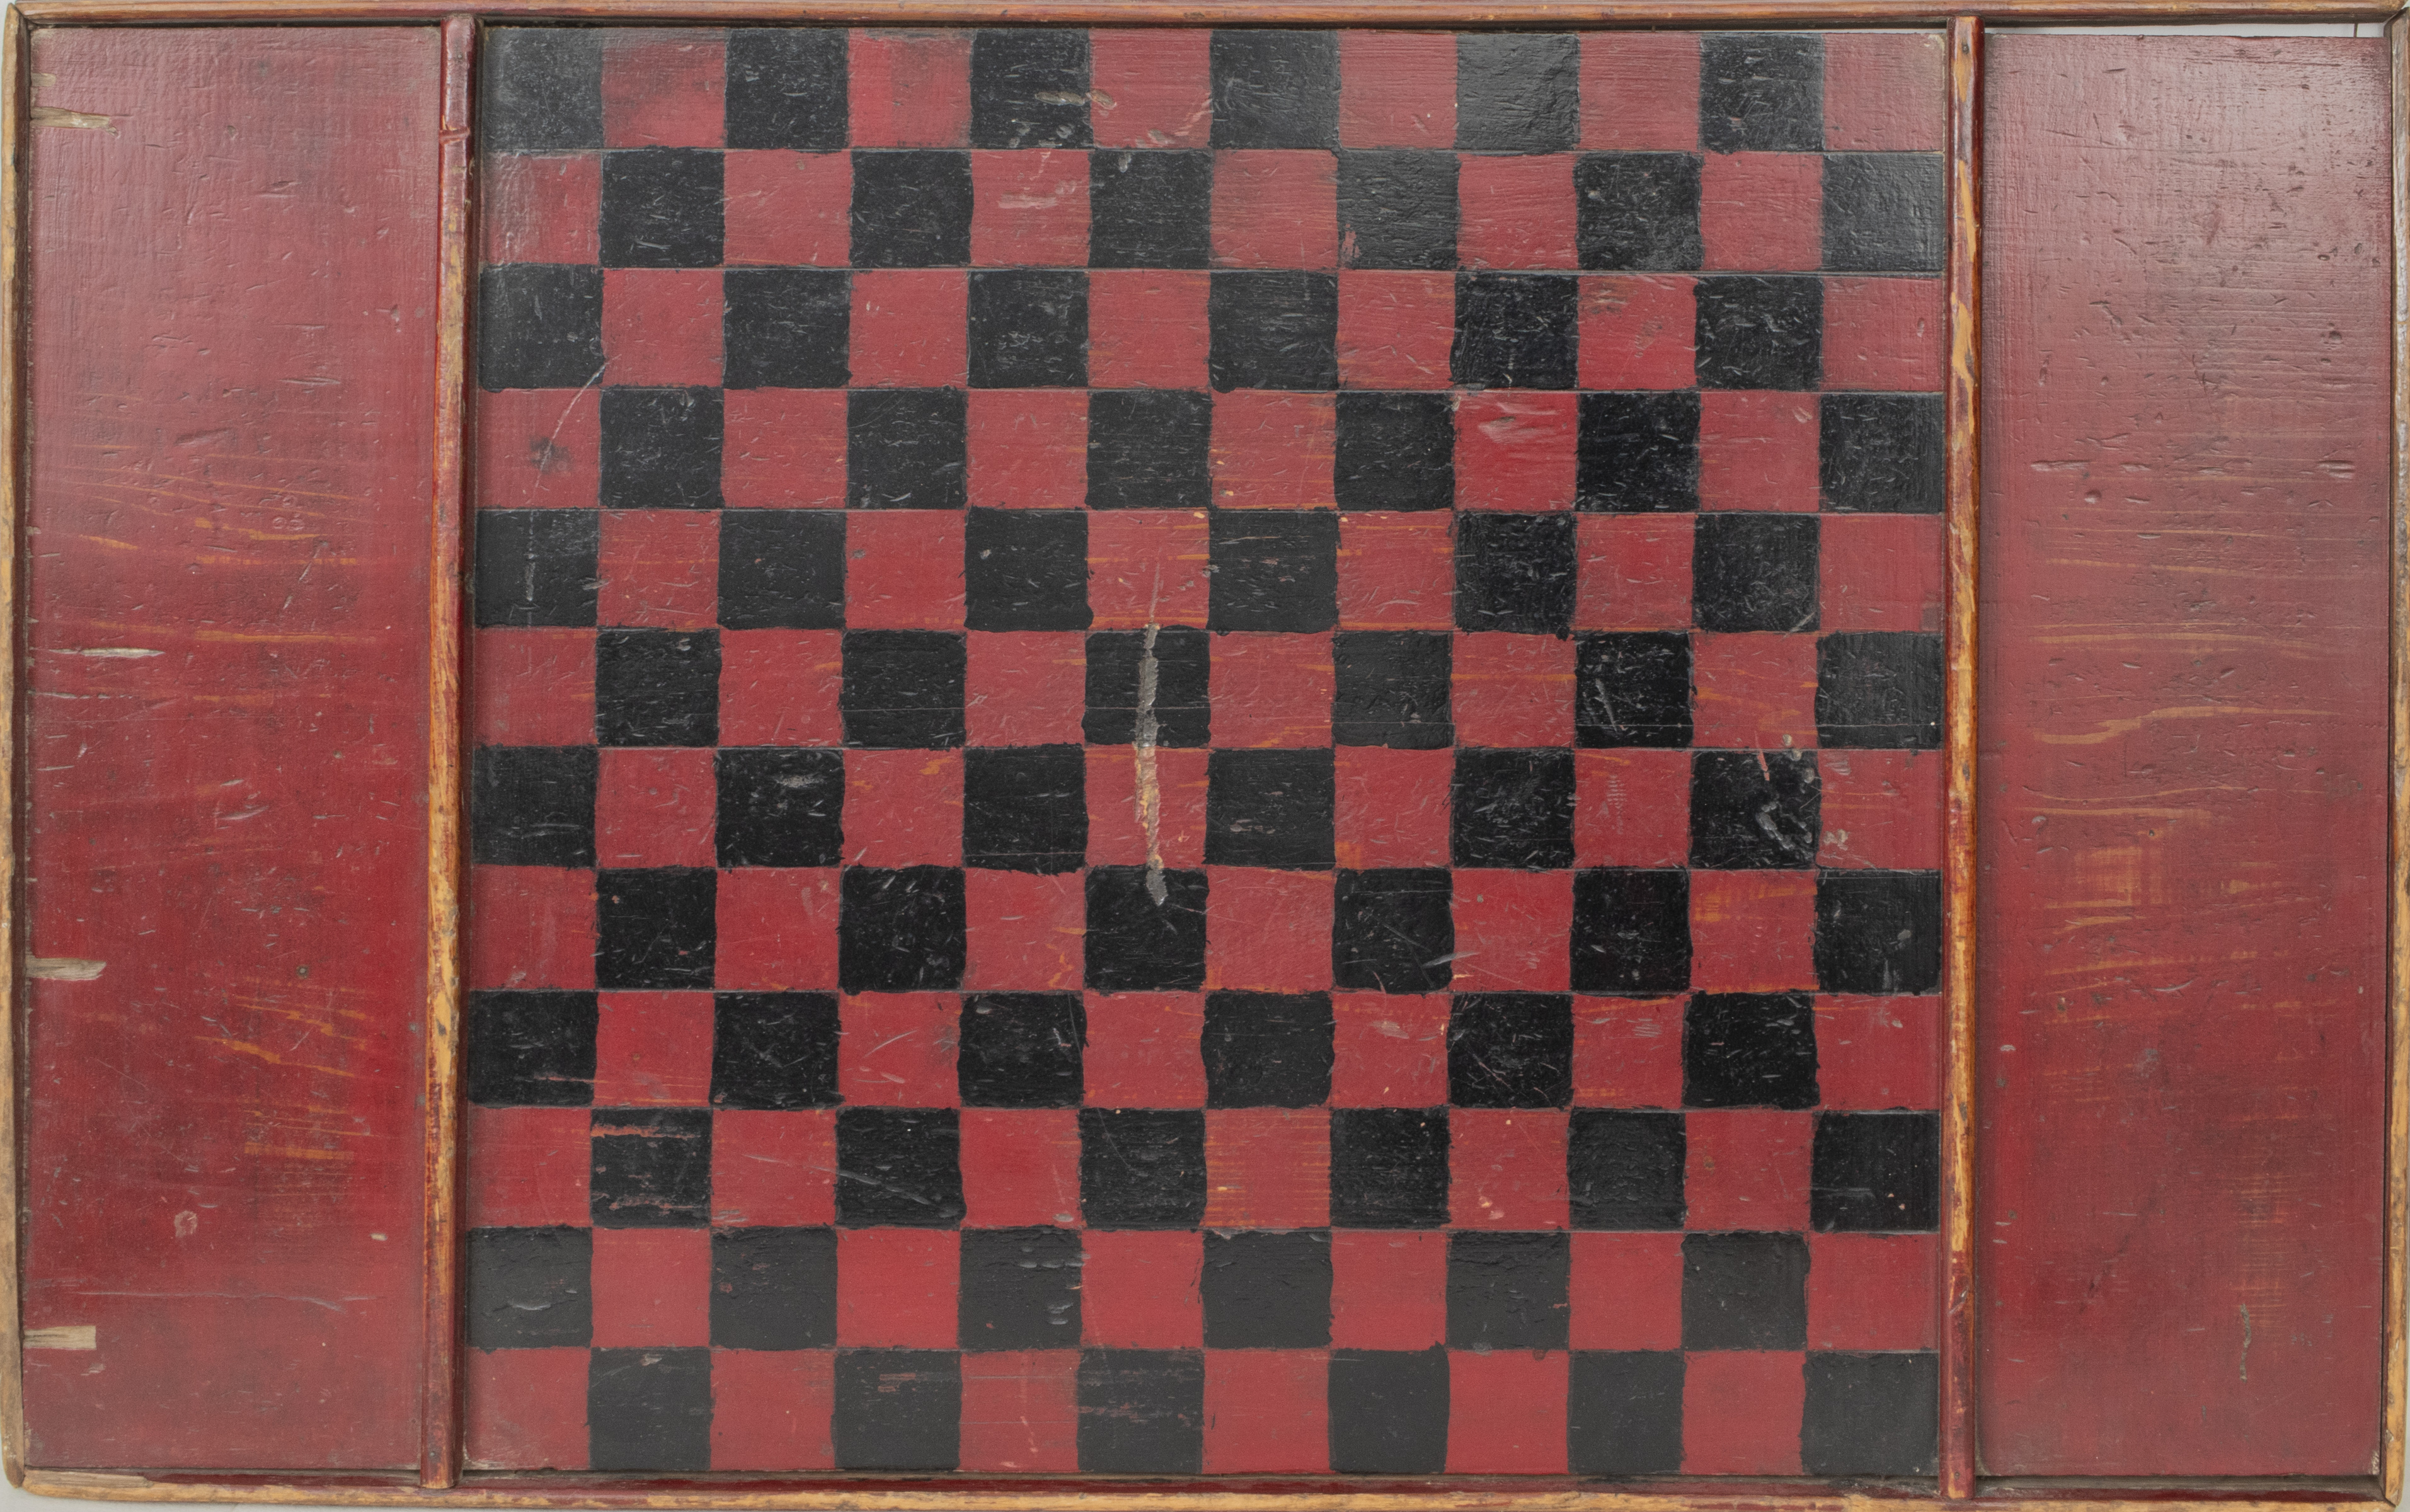 AMERICANA PAINTED WOODEN CHECKERBOARD 3c49f3